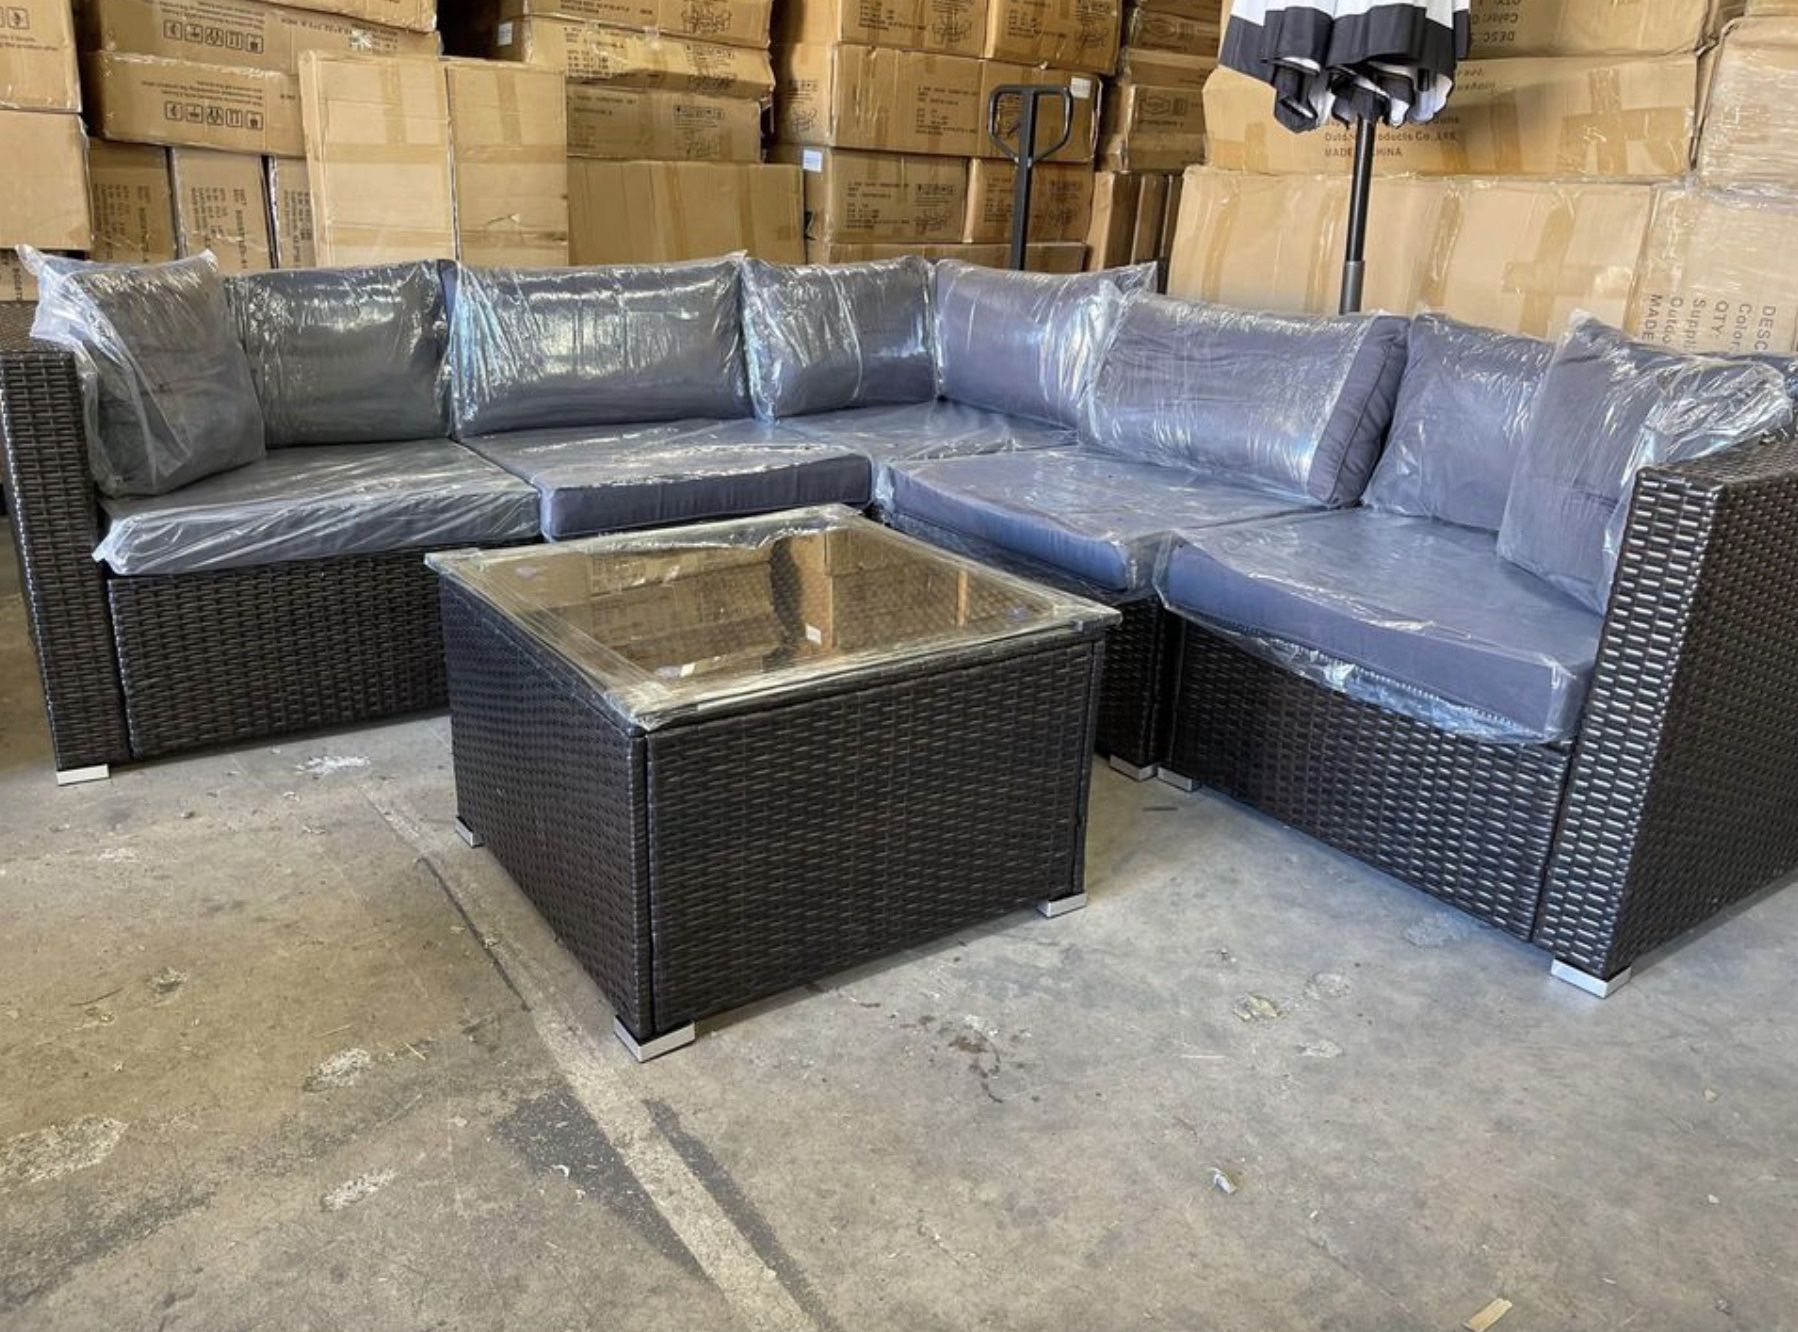 6 Piece L Shape Patio Furniture Set **NEW***Same Day Delivery*